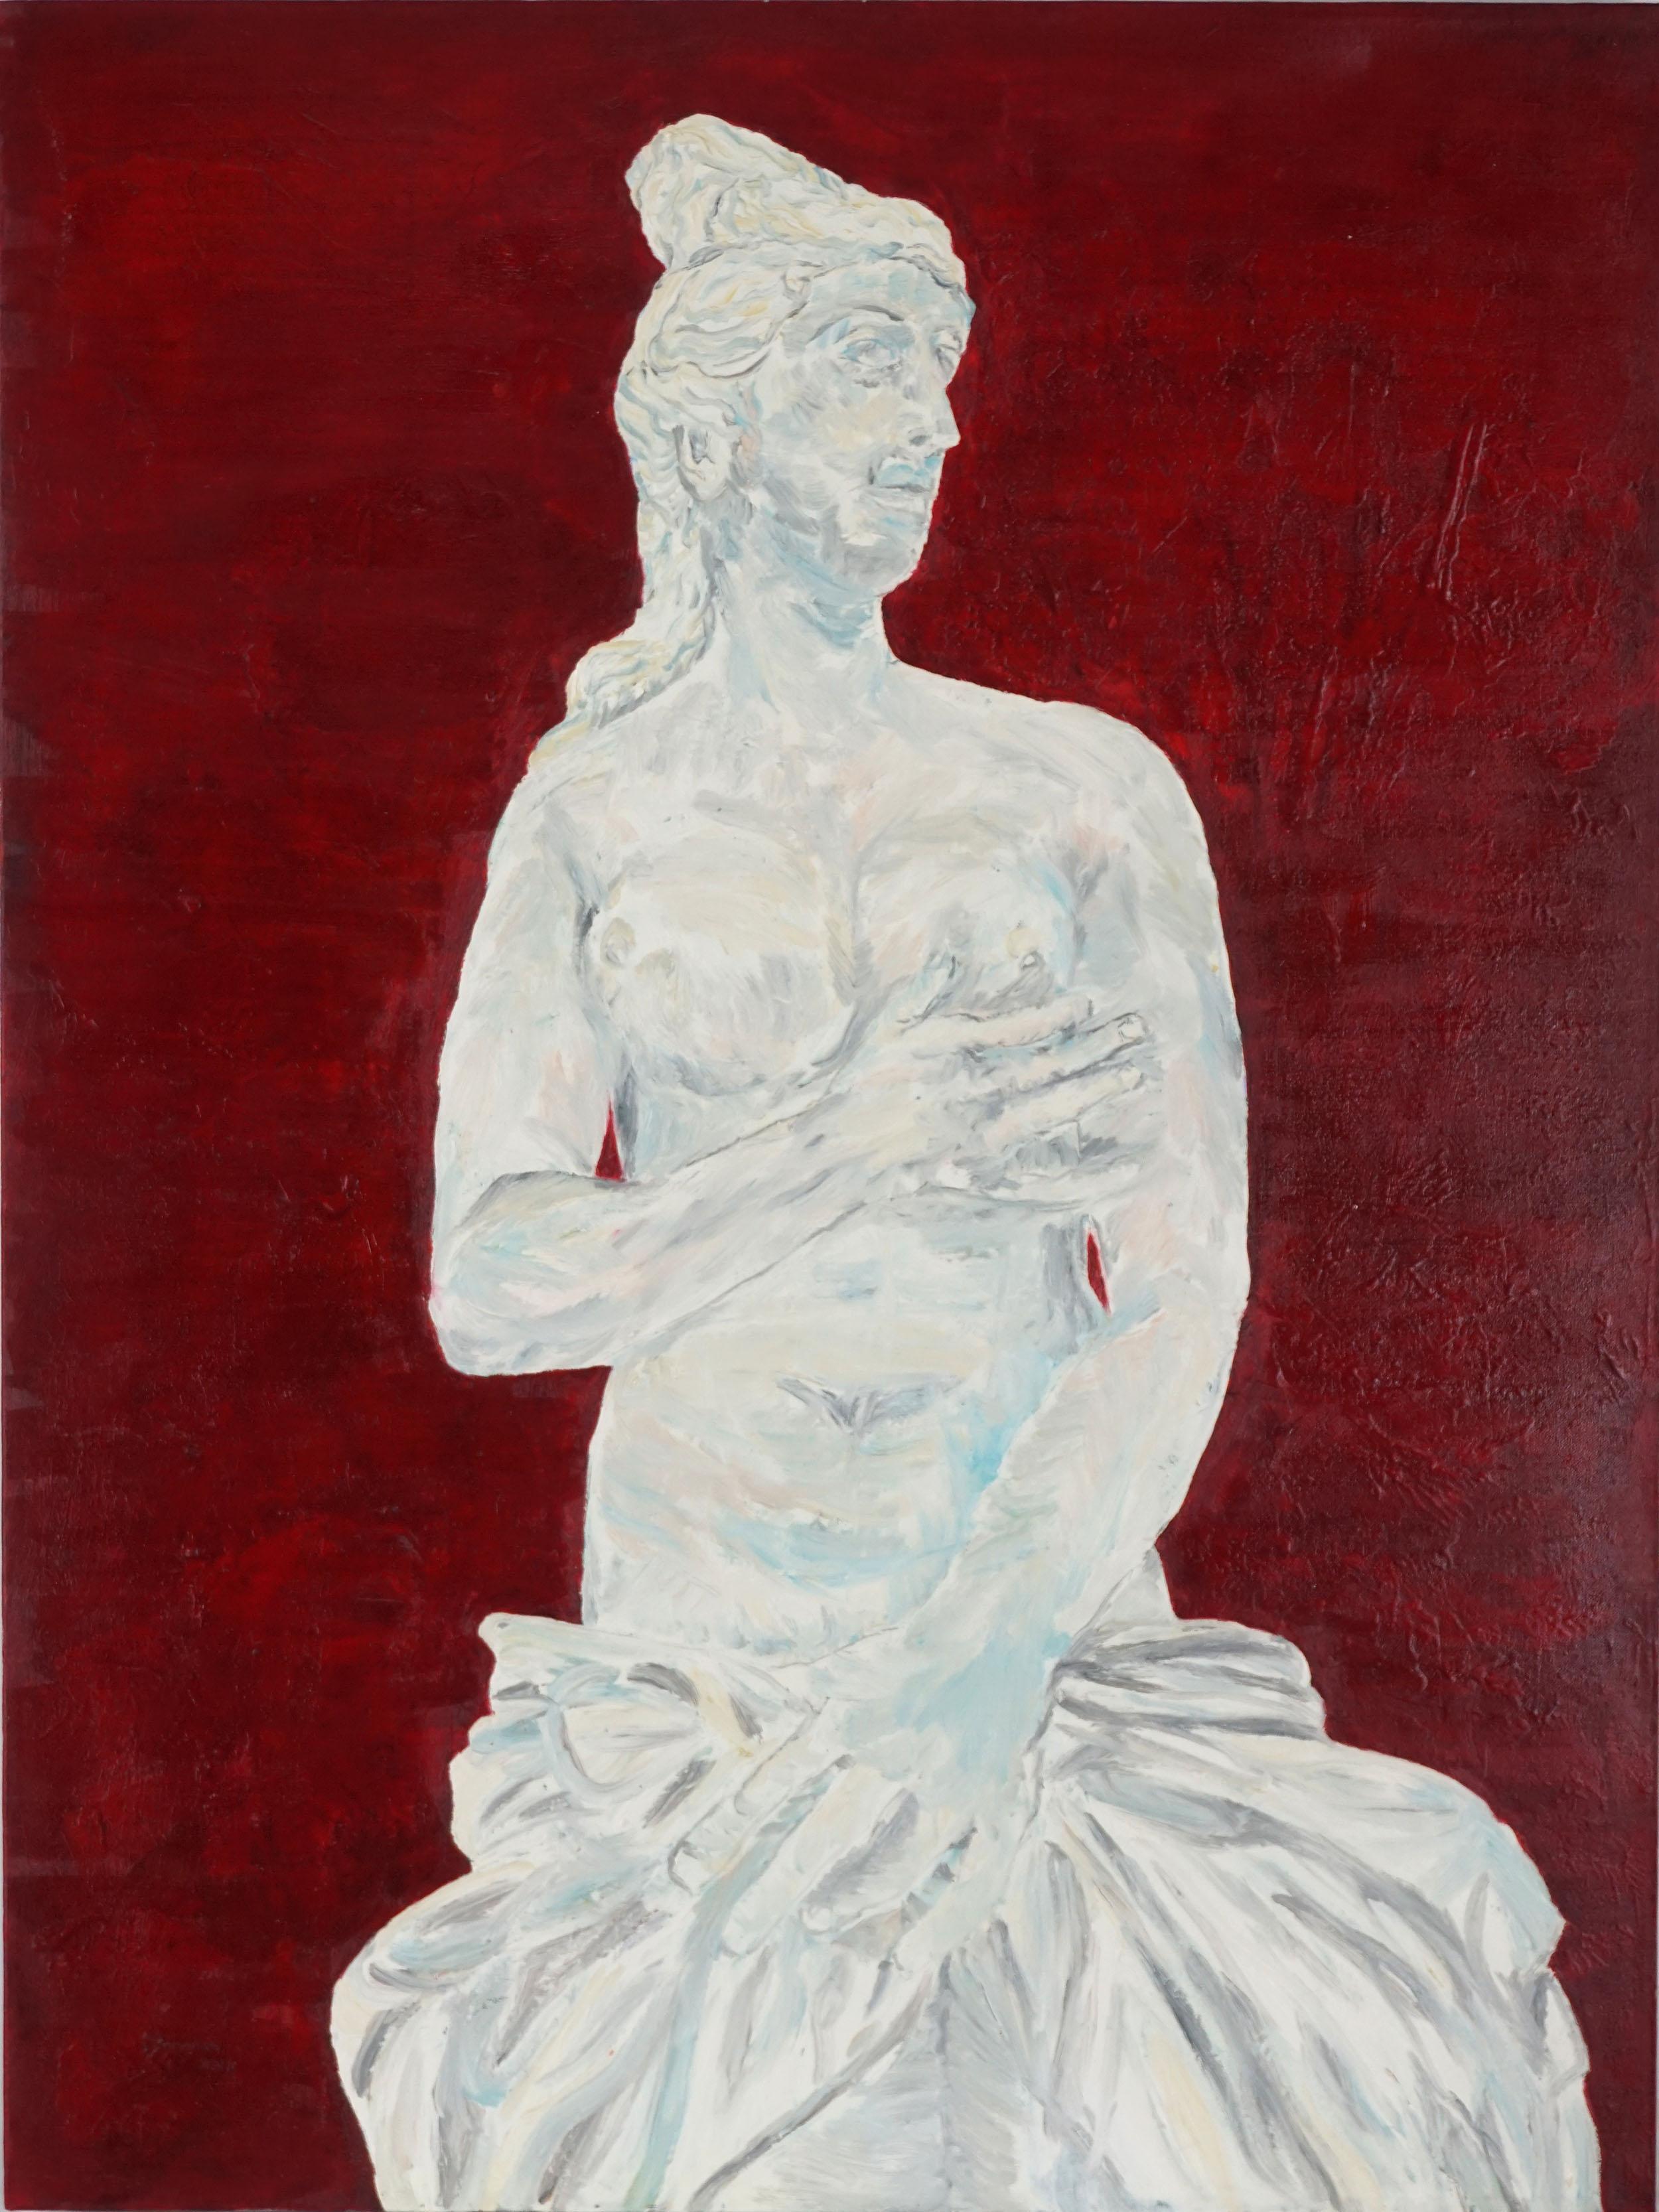 Francis Tanseco Figurative Painting - "Perfect Empire #7", Classical Aphrodite Figurative Study on Red